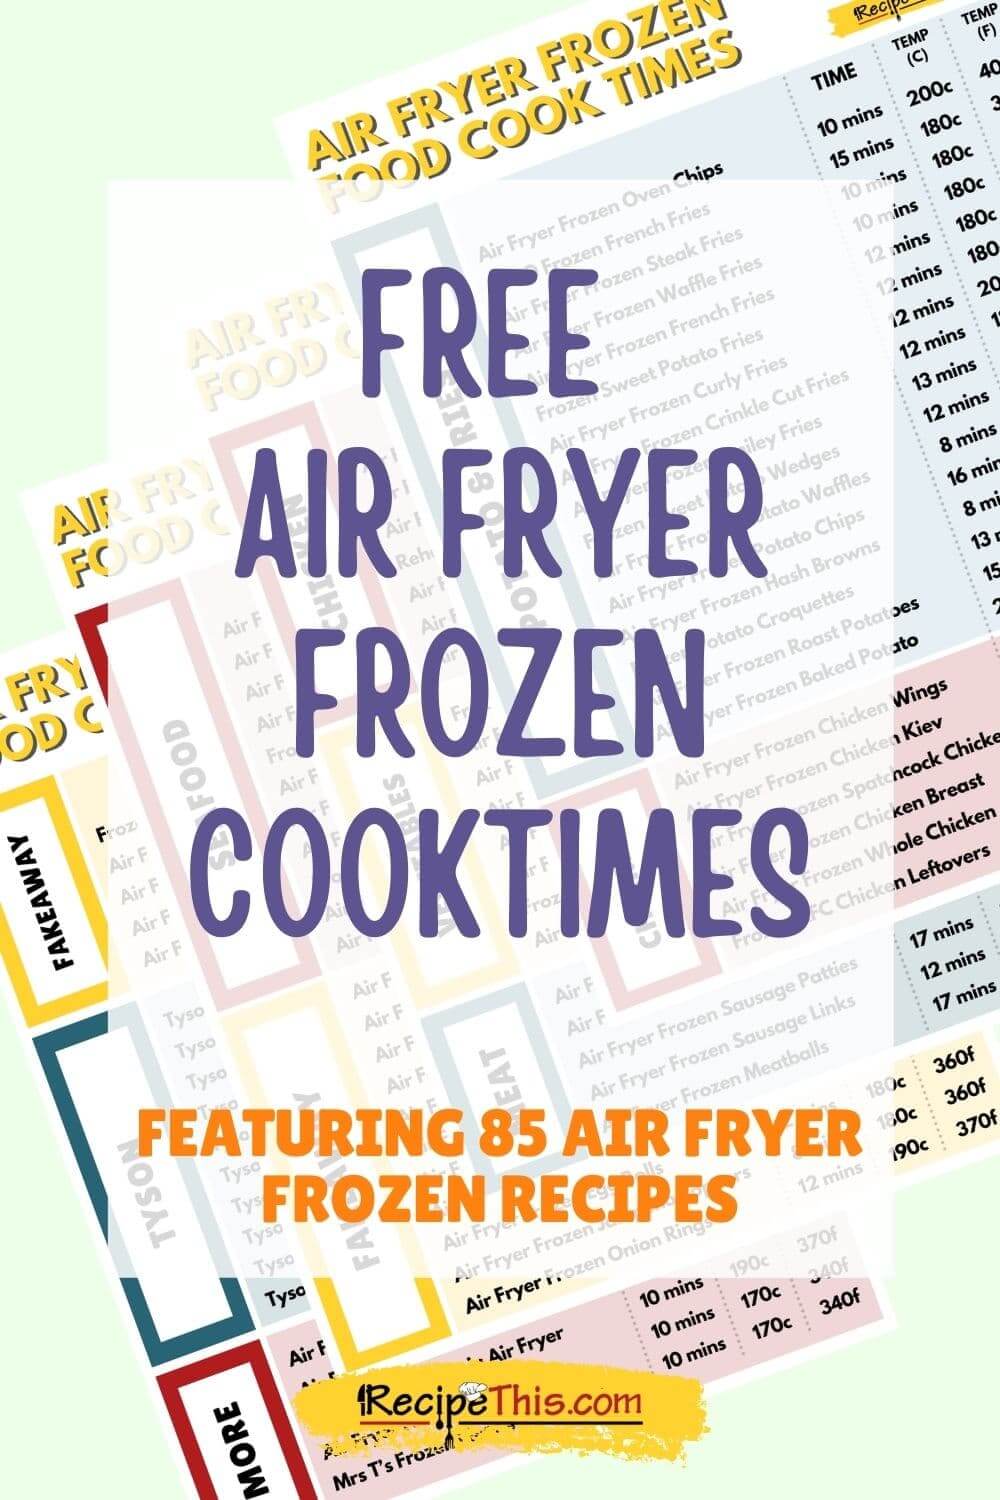 Air Fryer Frozen Food Cook Times | Recipe This